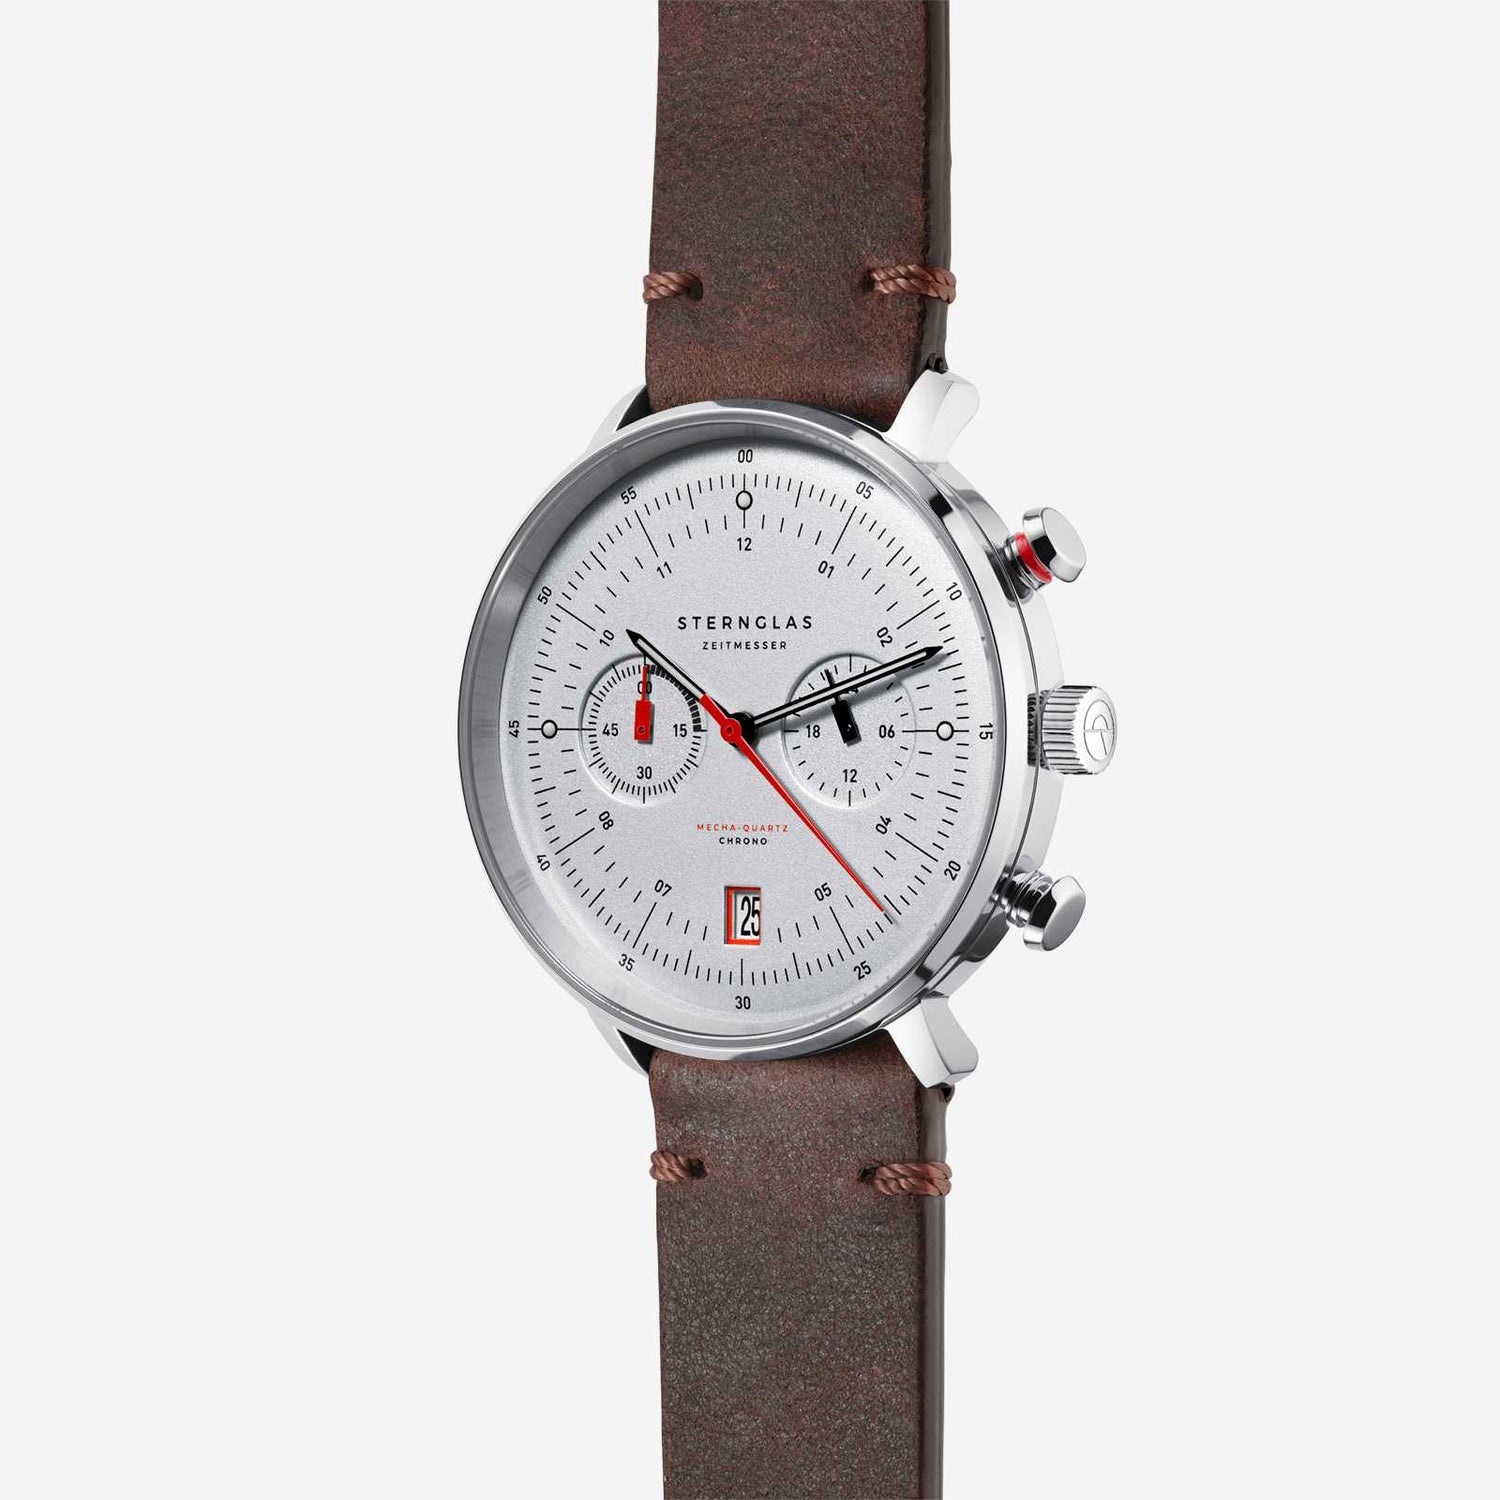 popup|Form follows function|The design of the chronograph follows the Bauhaus principle of "form follows function": the pusher at 2 o'clock has the same signal colour as the large chrono hand and the left-hand totaliser (stop minute) to emphasise the connection.